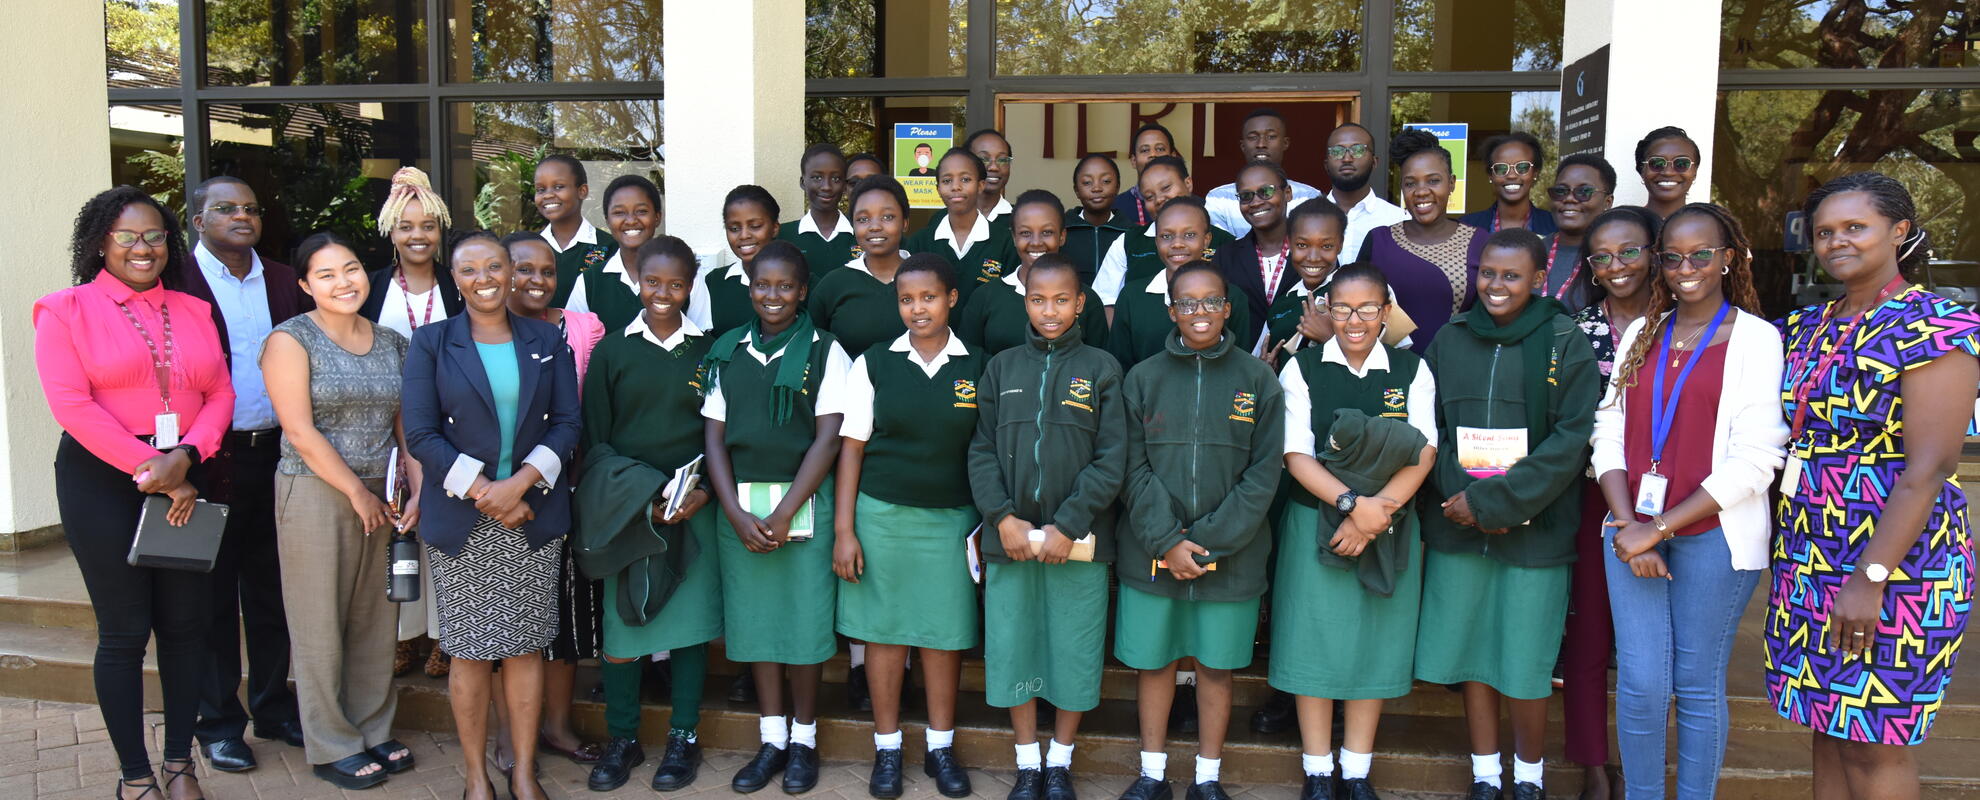 The Capacity Development Unit celebrates International Day of Women and Girls in Science with visit from secondary school 